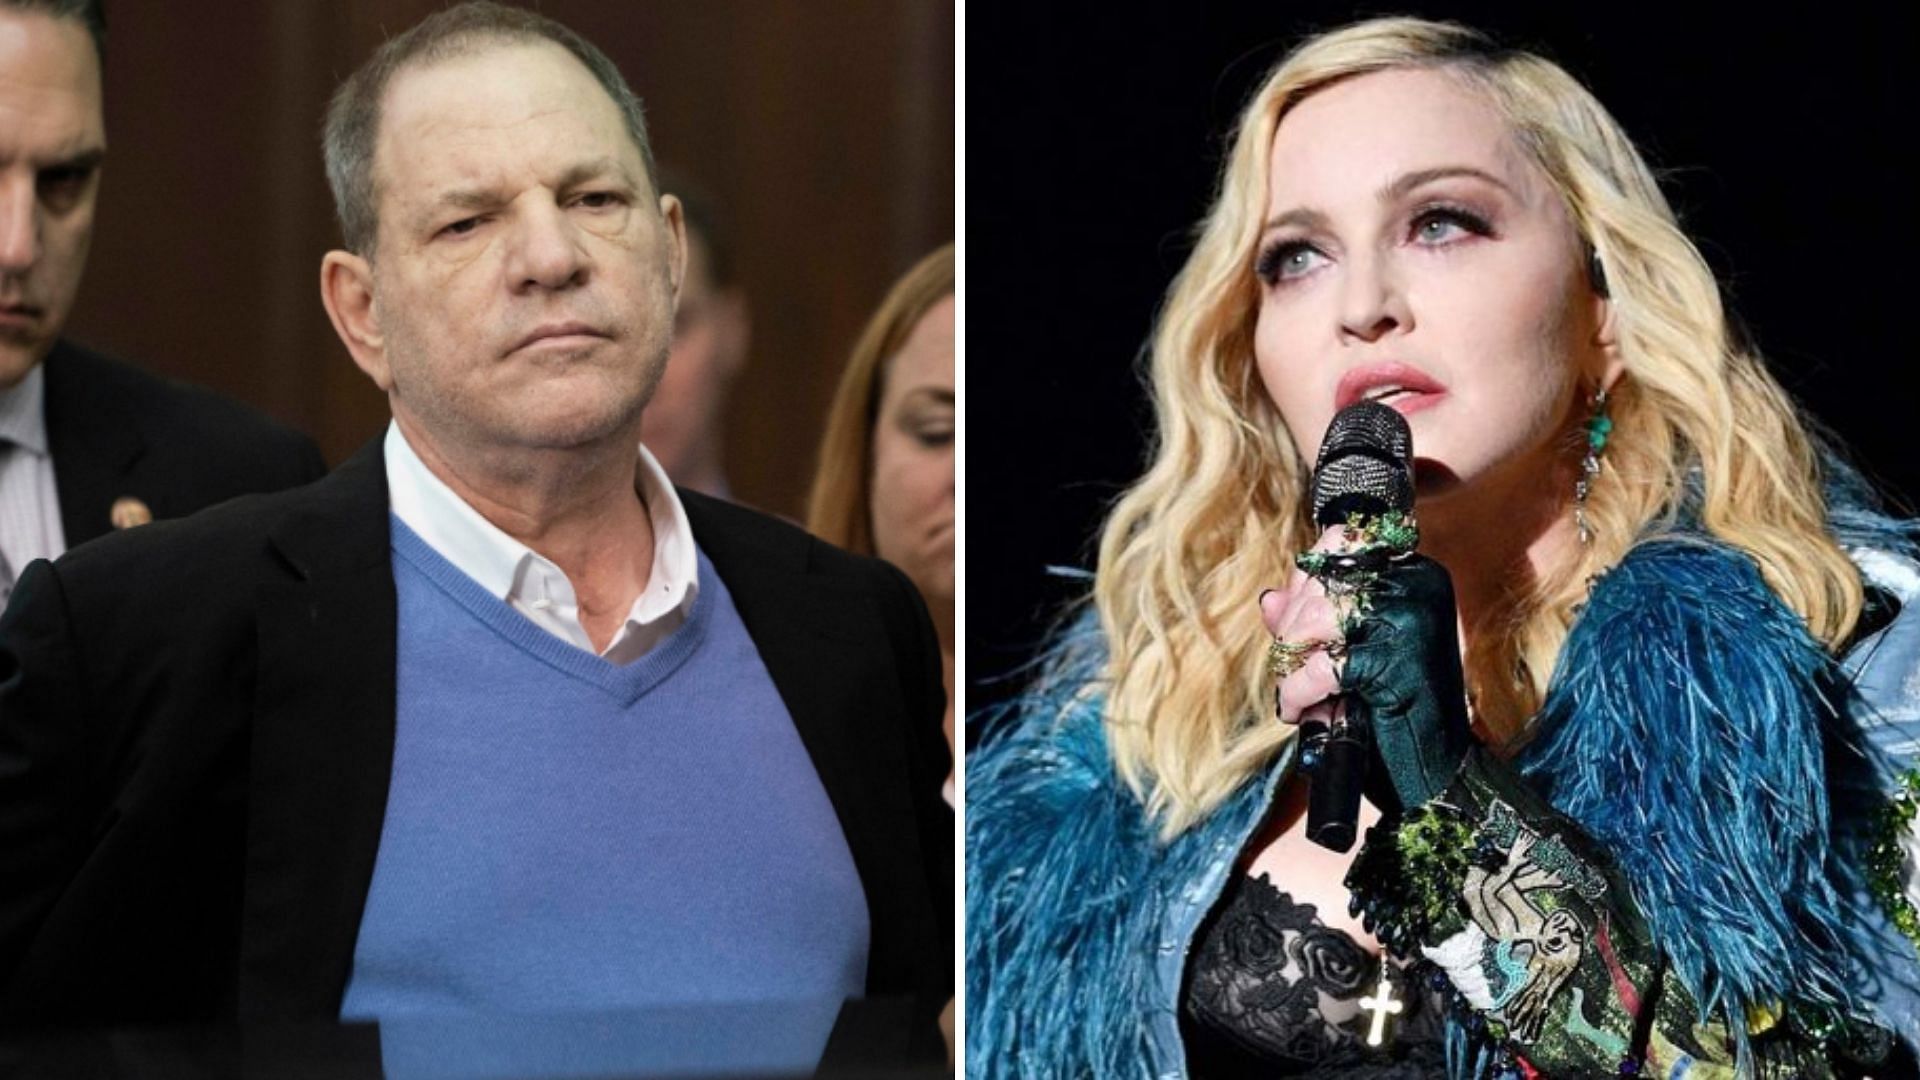 Madonna spoke out against Harvey Weinstein in an interview.